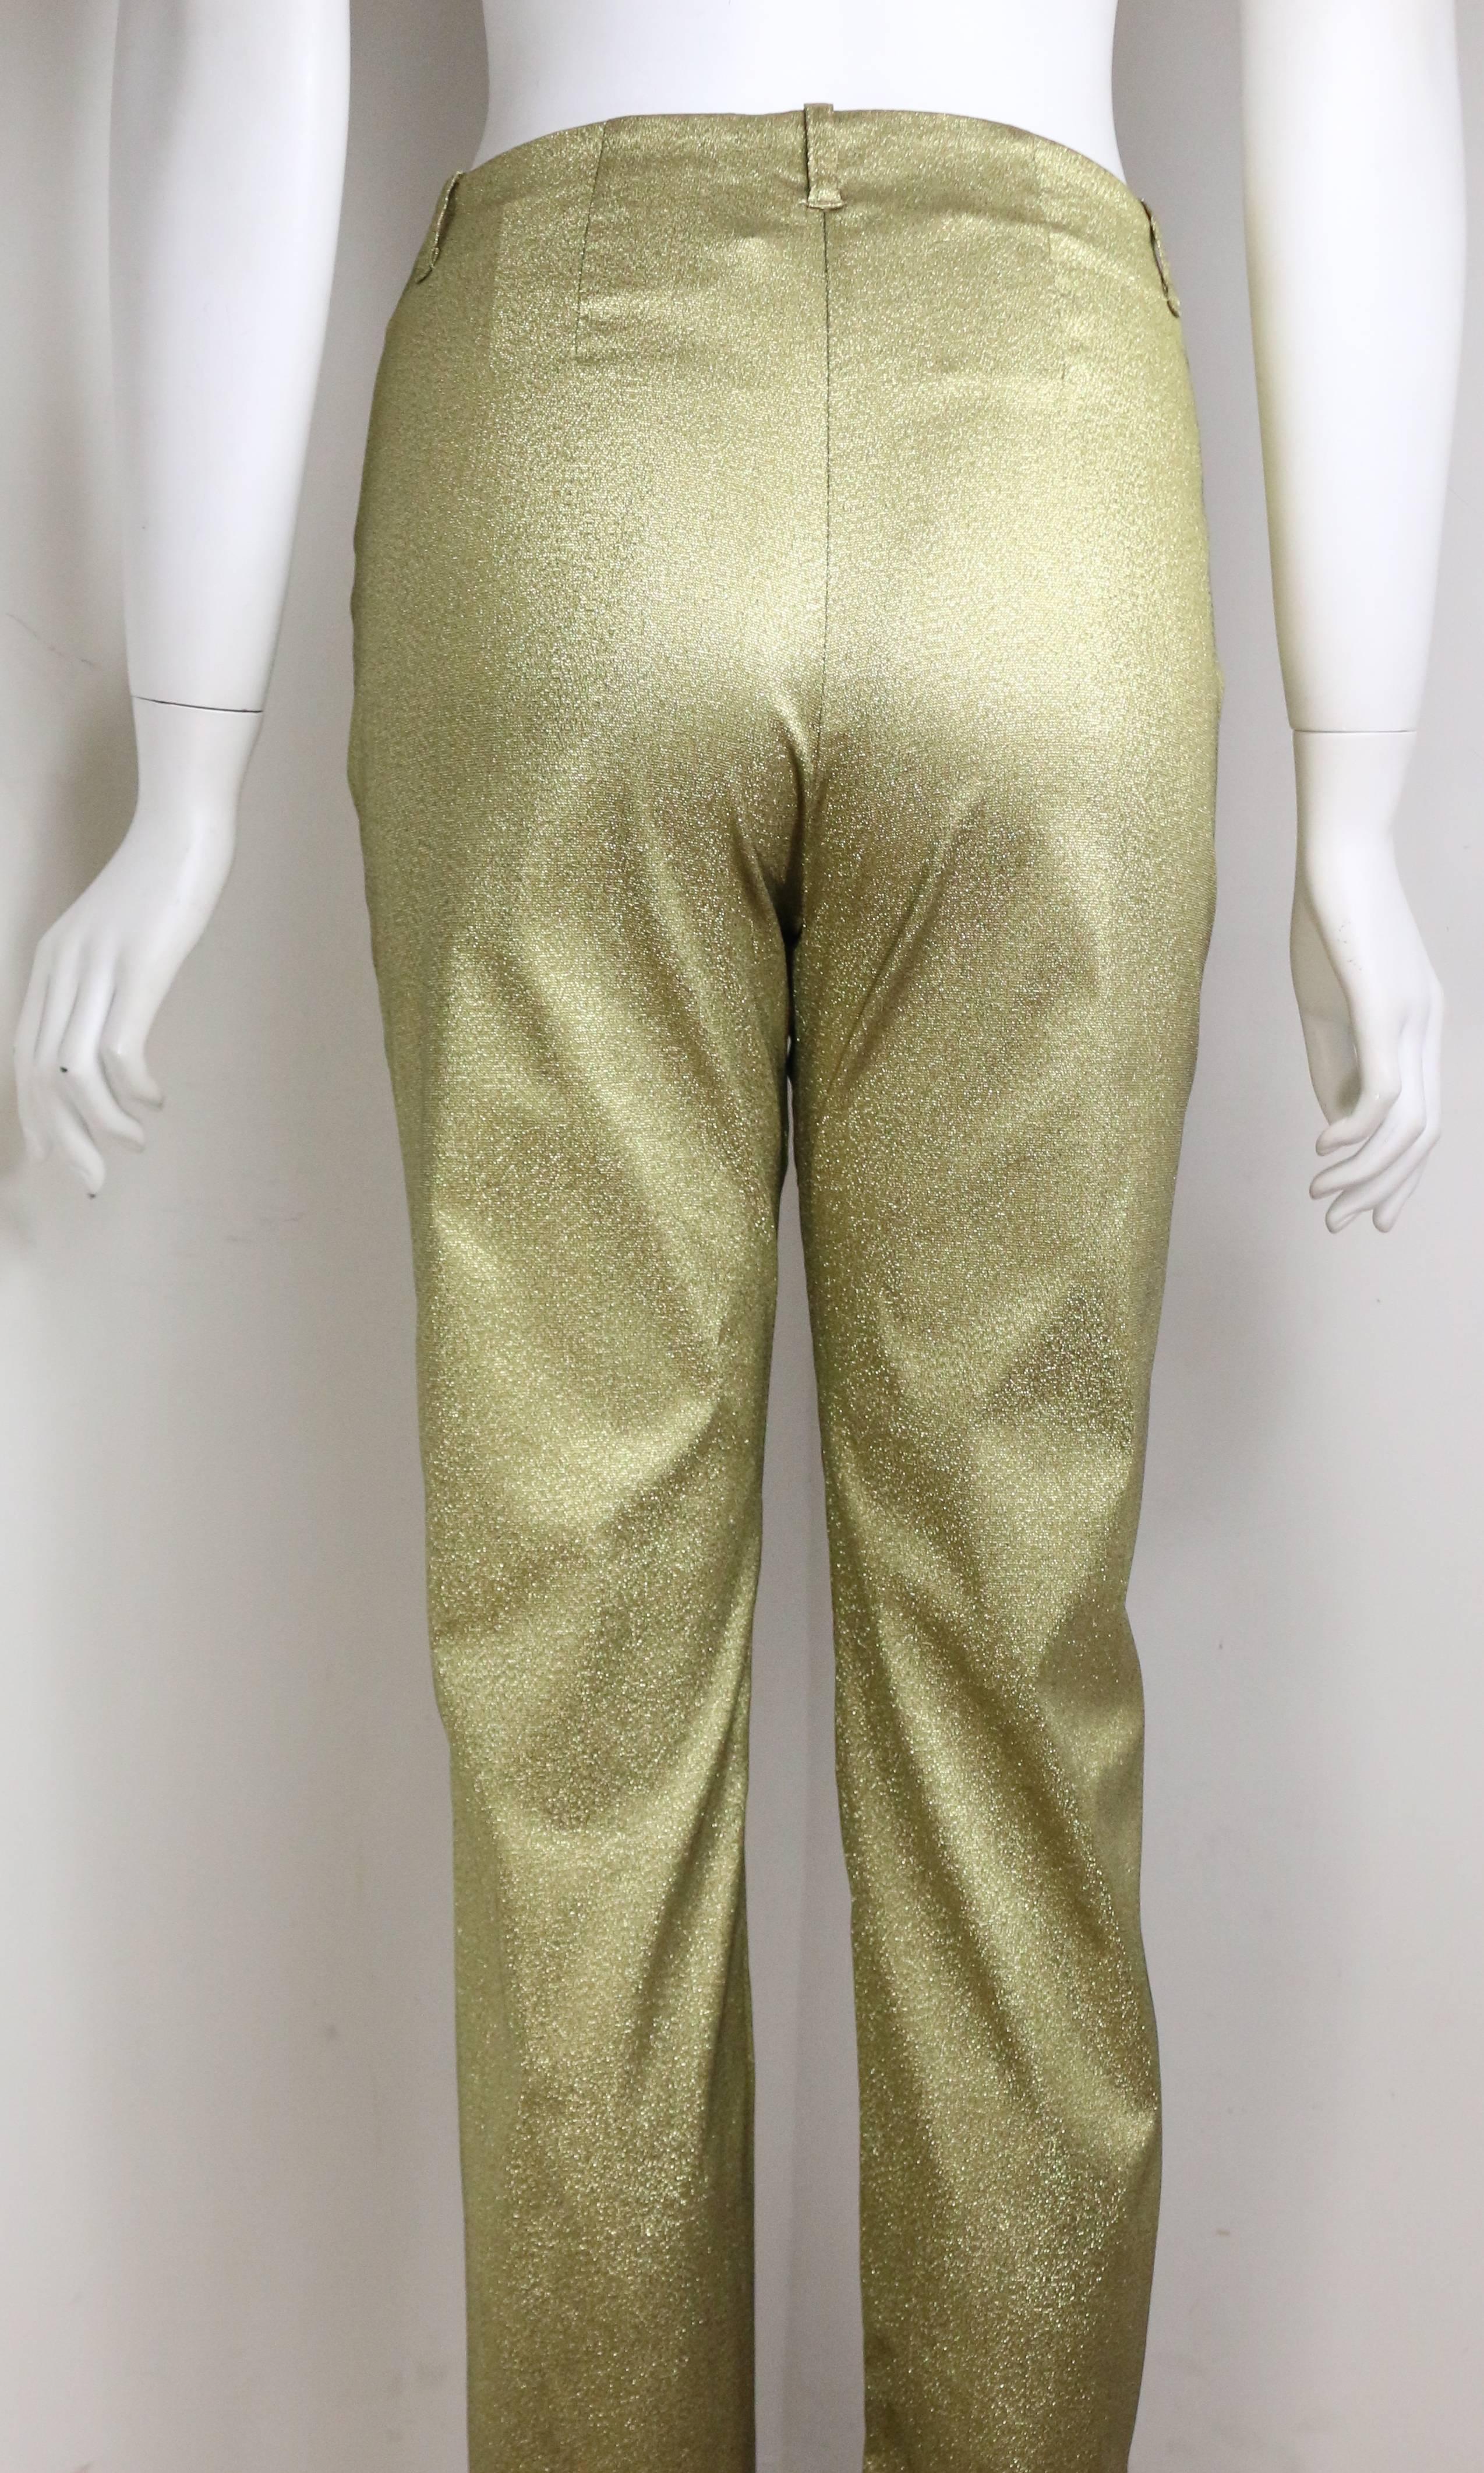 - Vintage 90s Plein Sud gold metallic pants. Featuring a gold button and zipper closure. The fabric of the pants is sketchy and a straight leg cutting fits for everyone! 

- Made in France. 

- Size 42/10. 

- 50%Nylon, 25% Acetate, 20% Polyester,